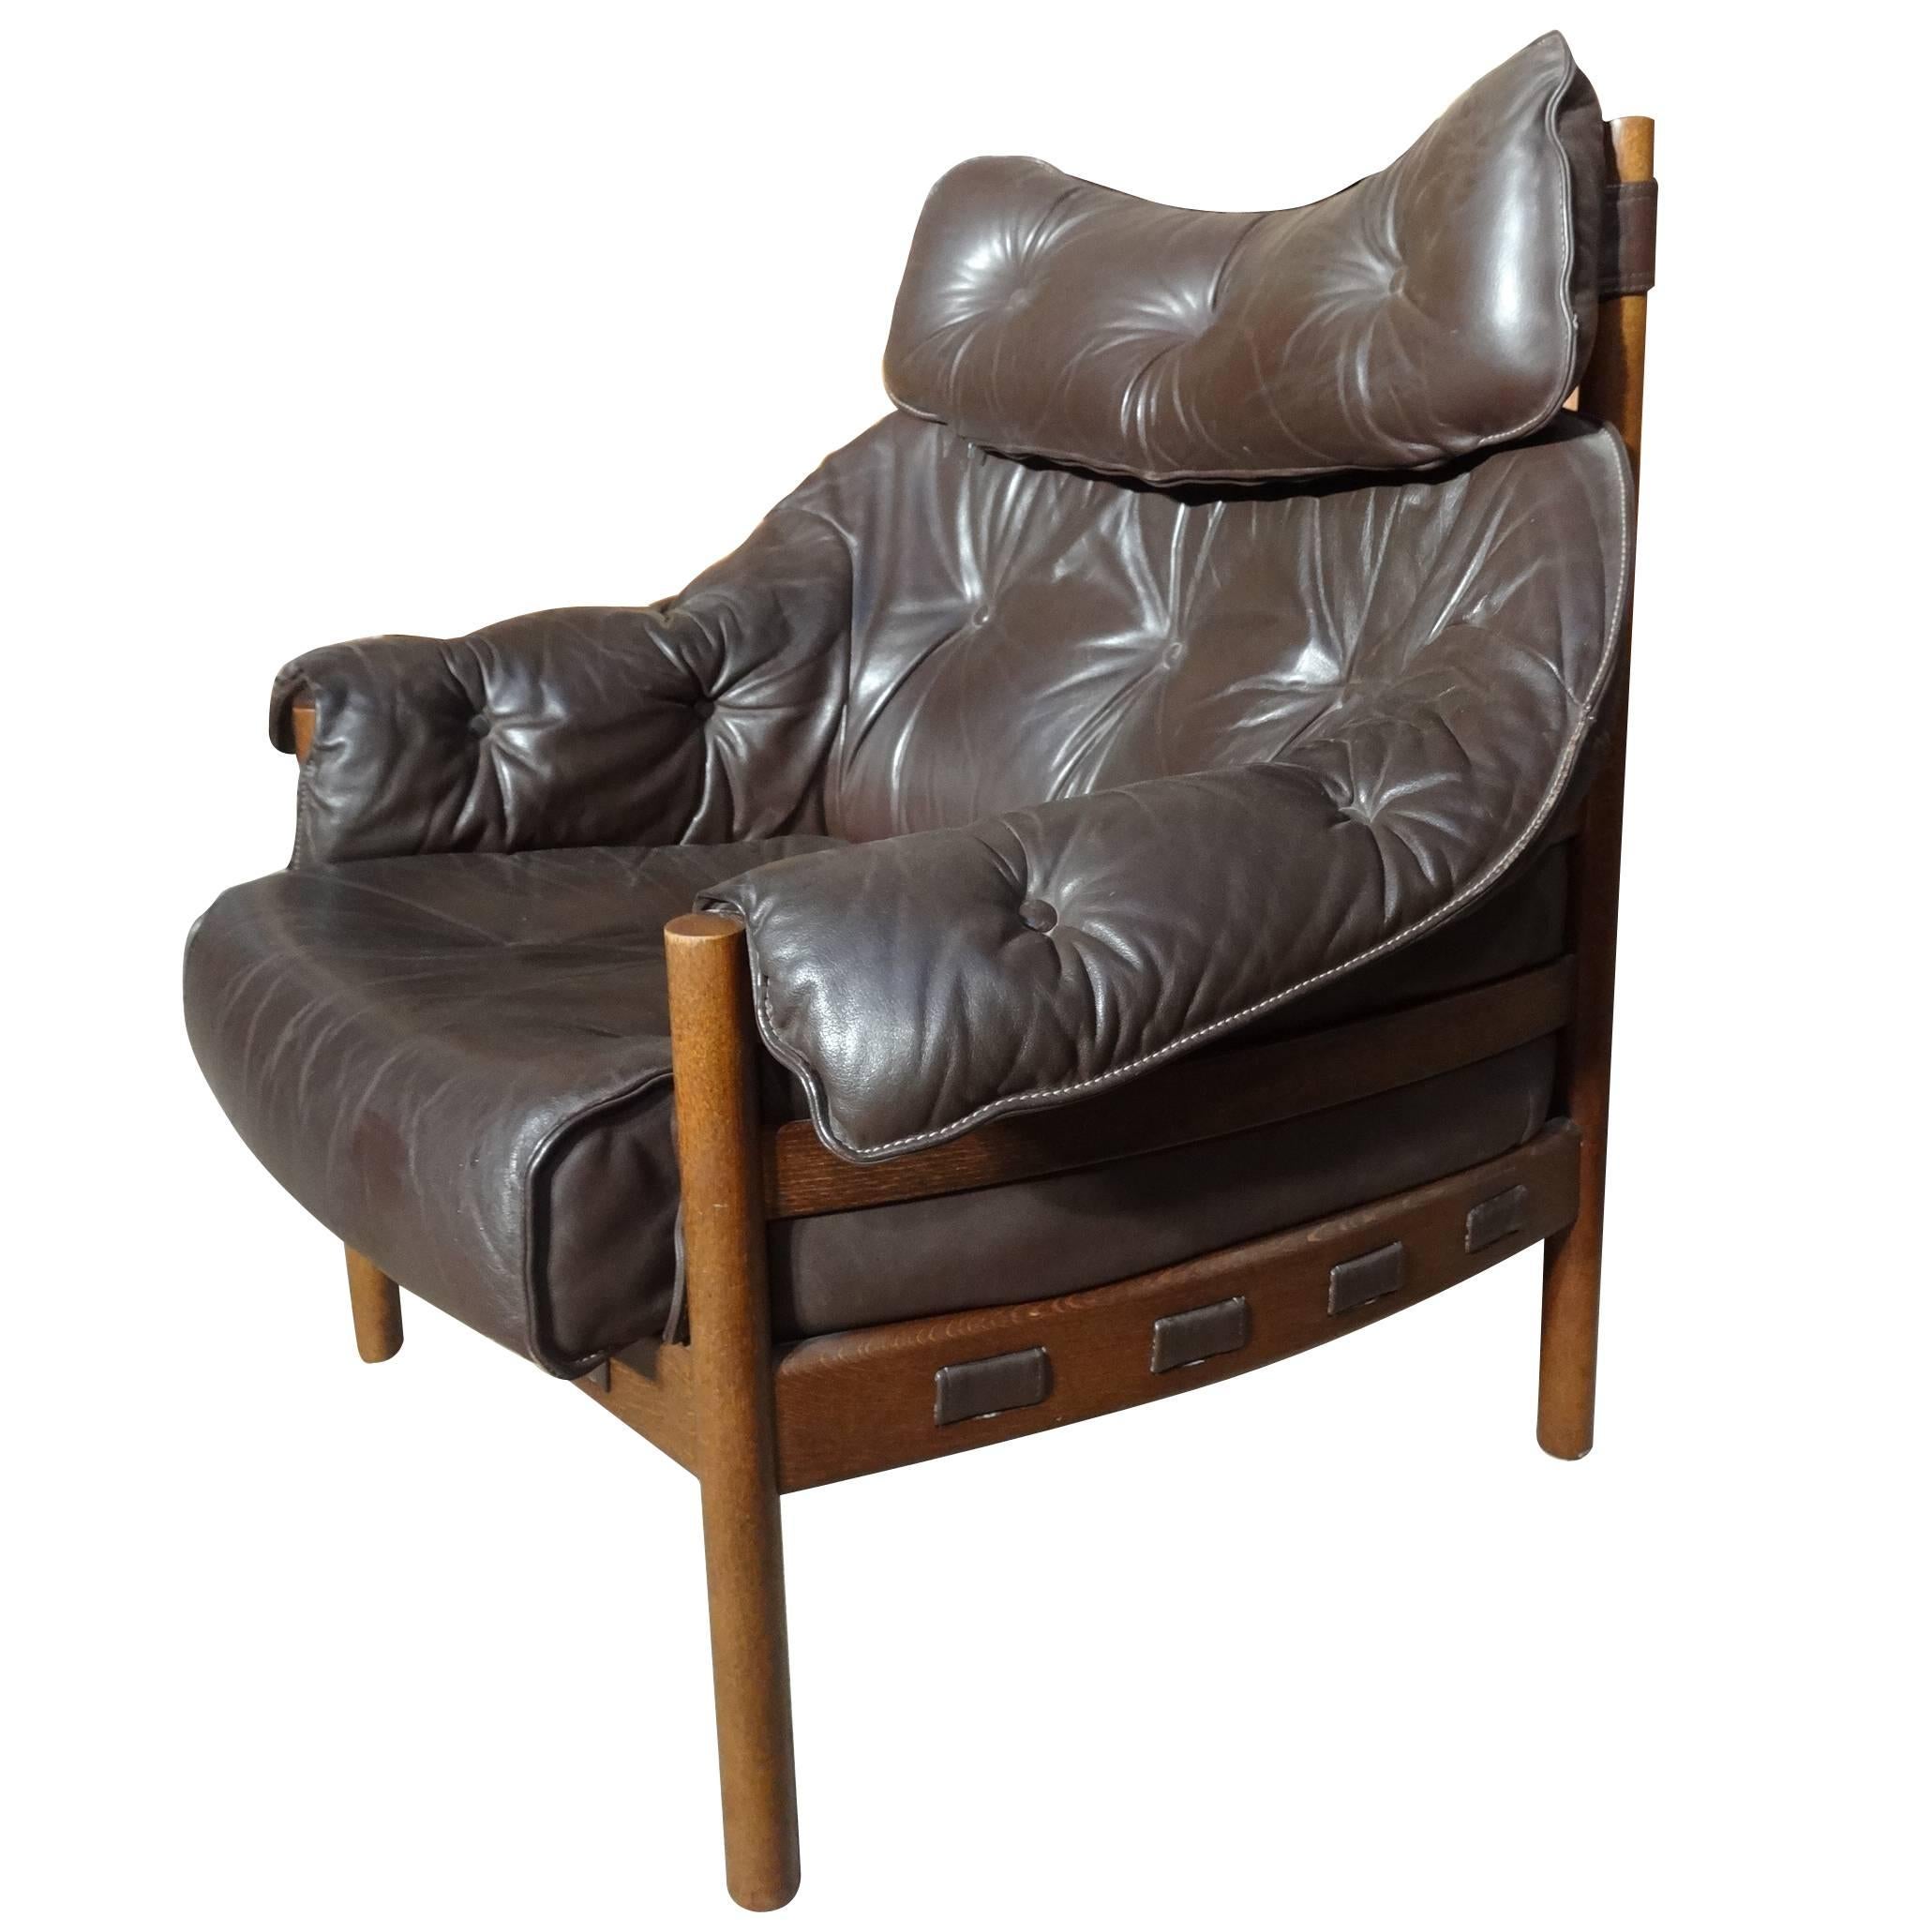 Sought after, Rare Danish  Arne Norell Brown Leather Gents Club Chair